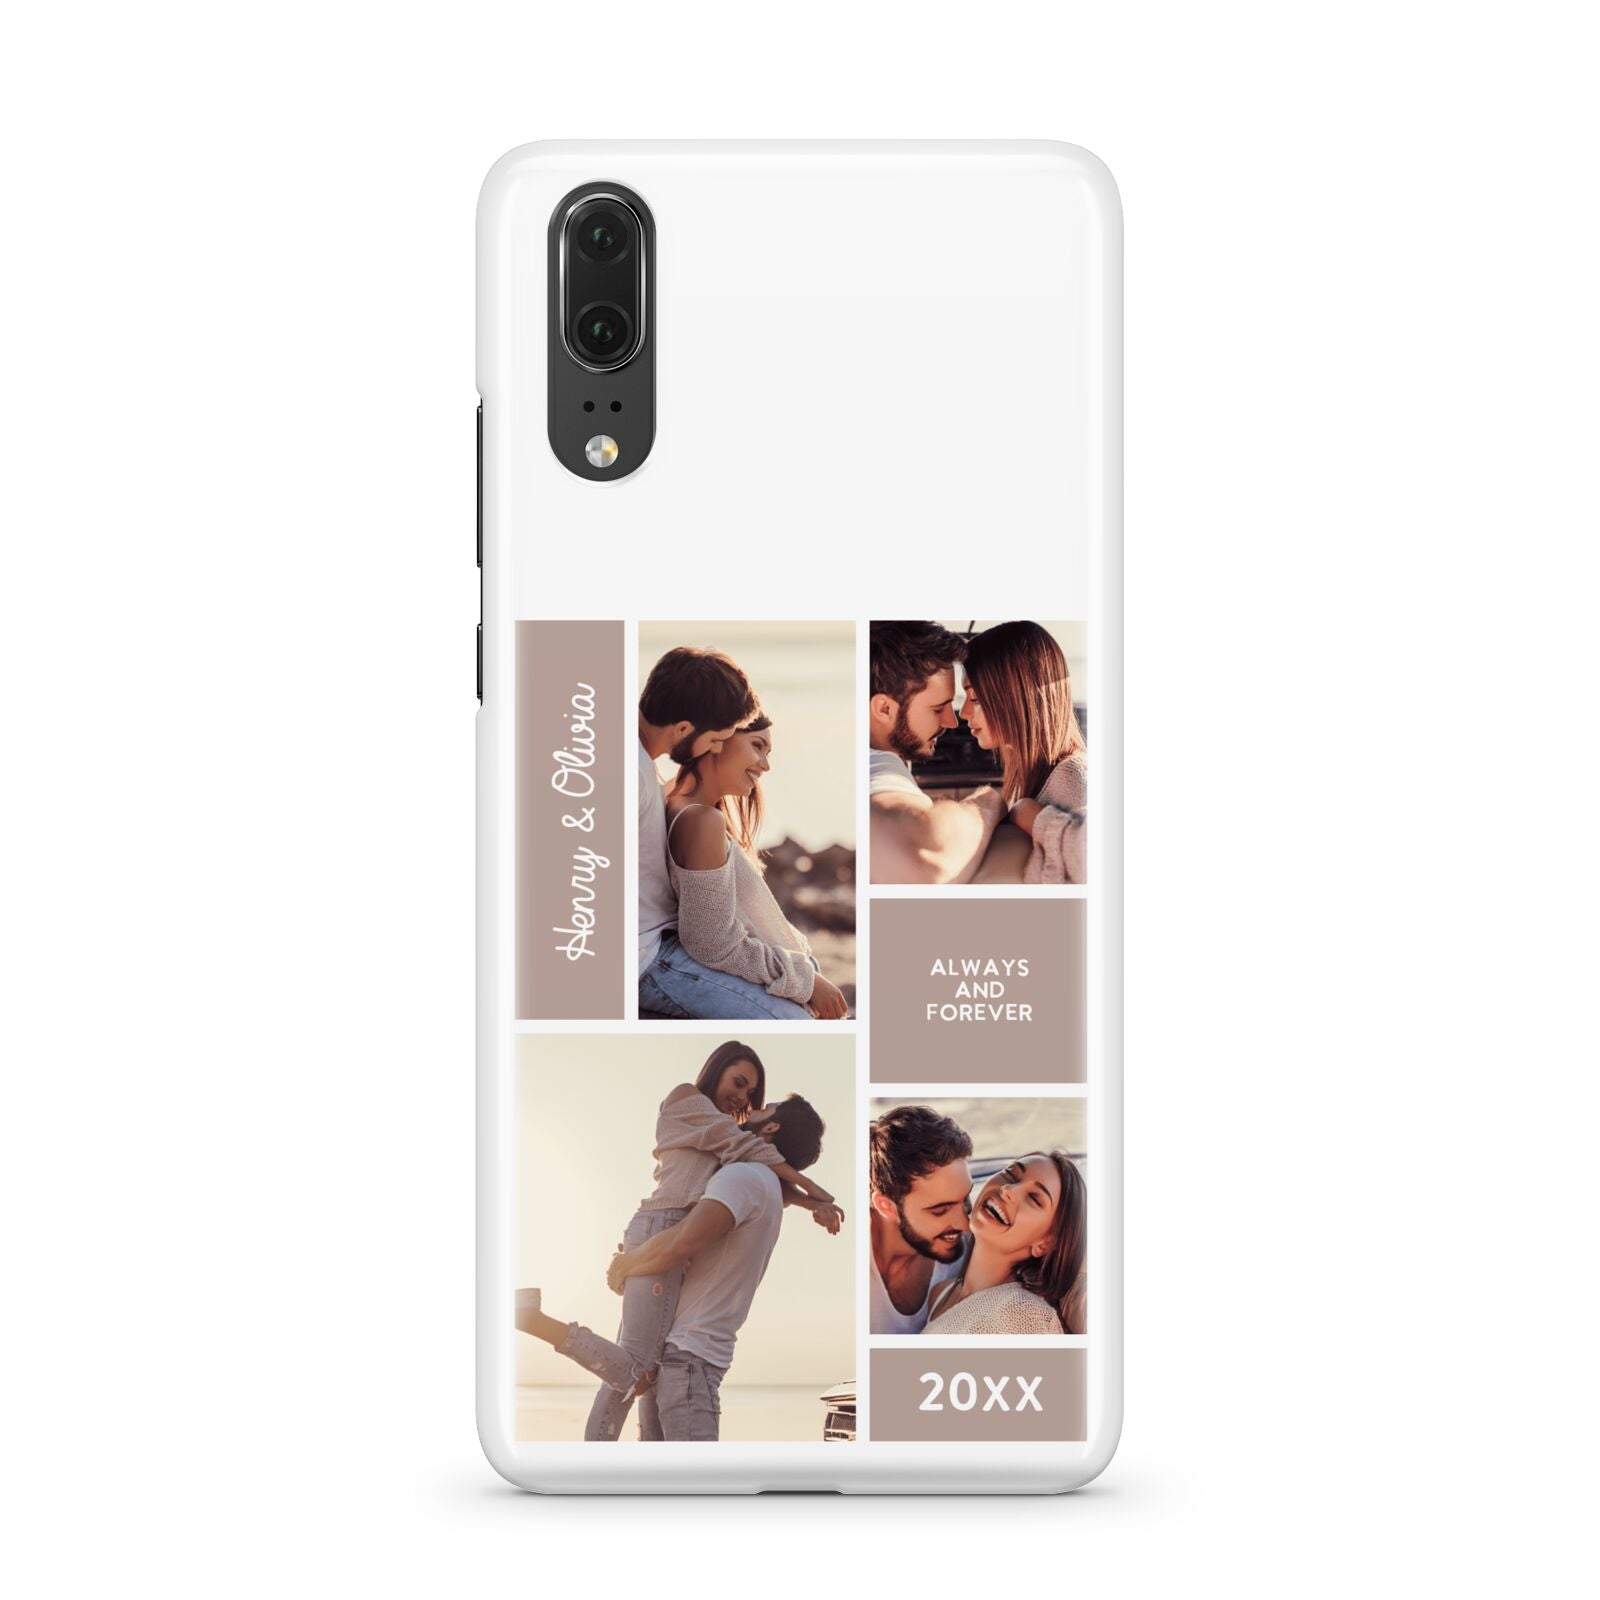 Couples Valentine Photo Collage Personalised Huawei P20 Phone Case